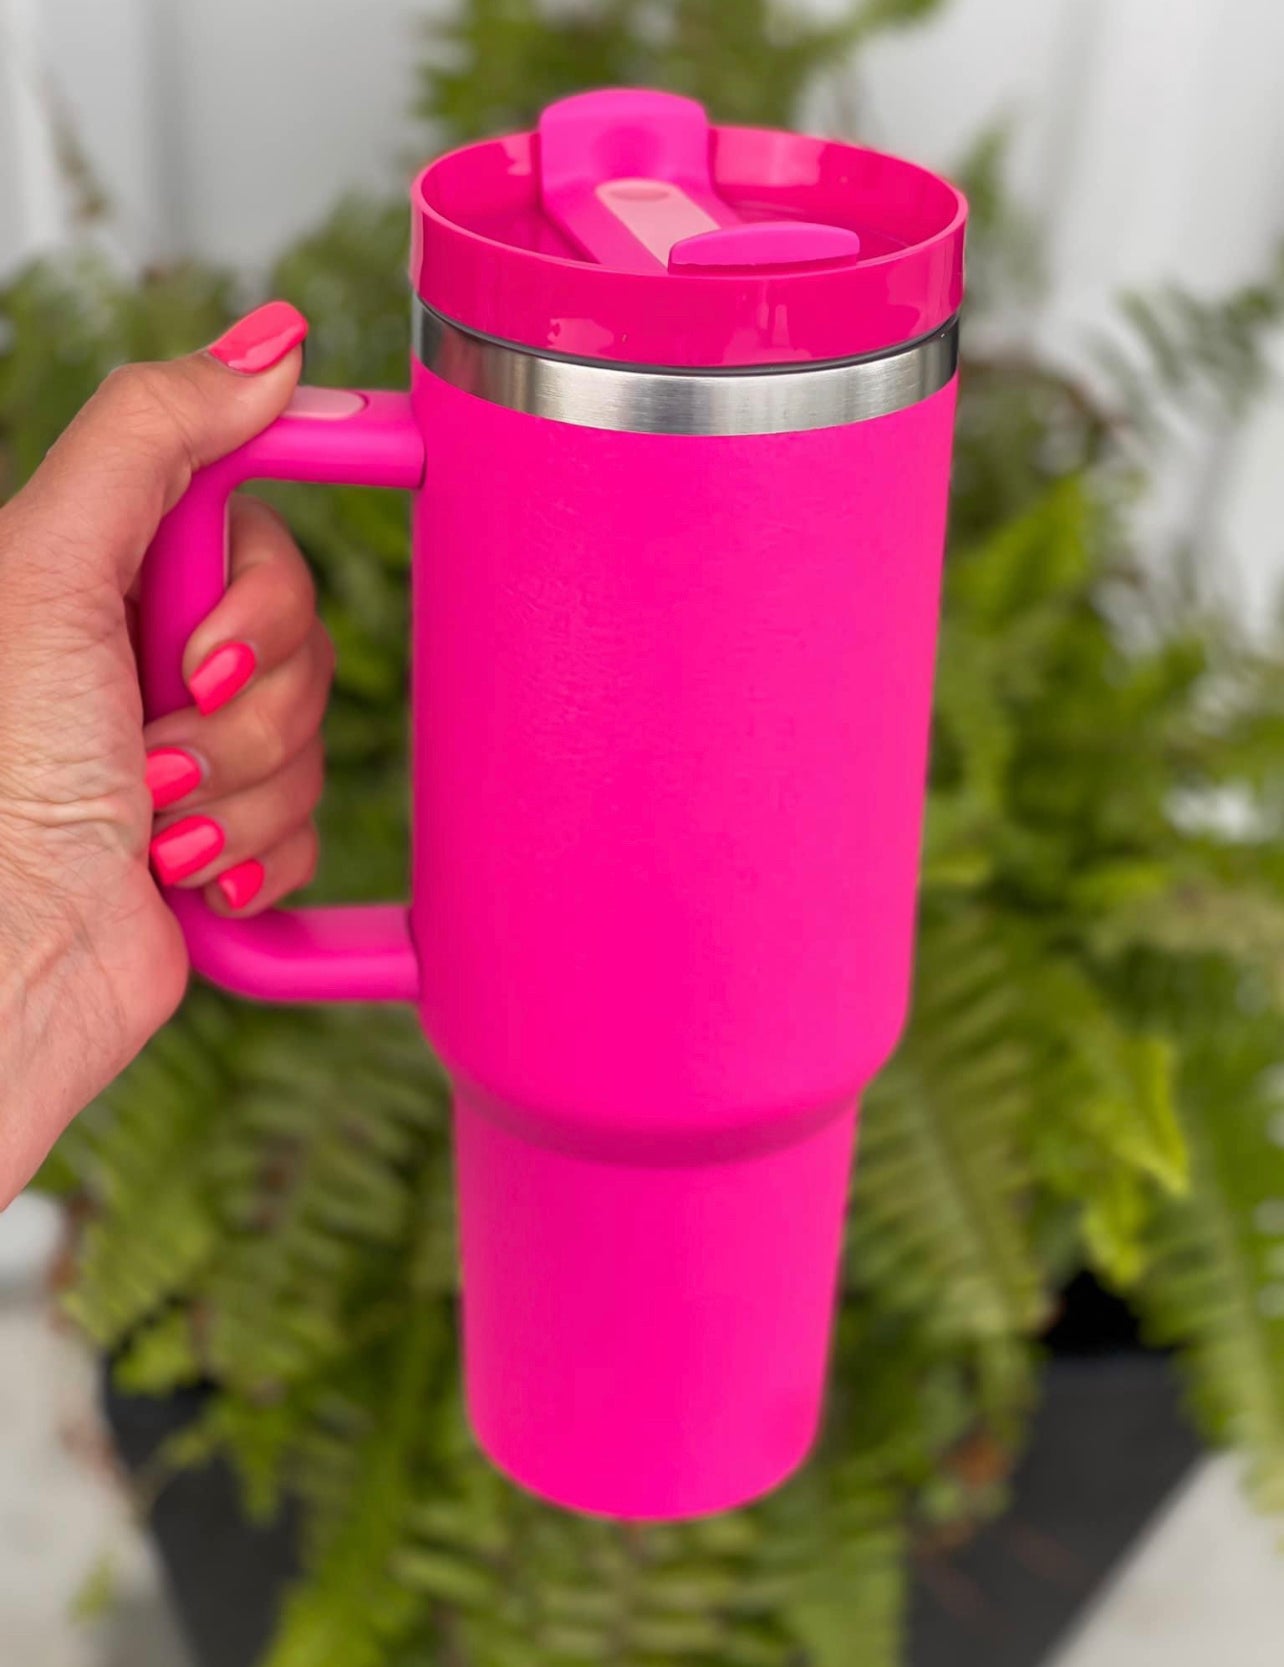 The Dupe Hot Pink 40oz. Tumbler